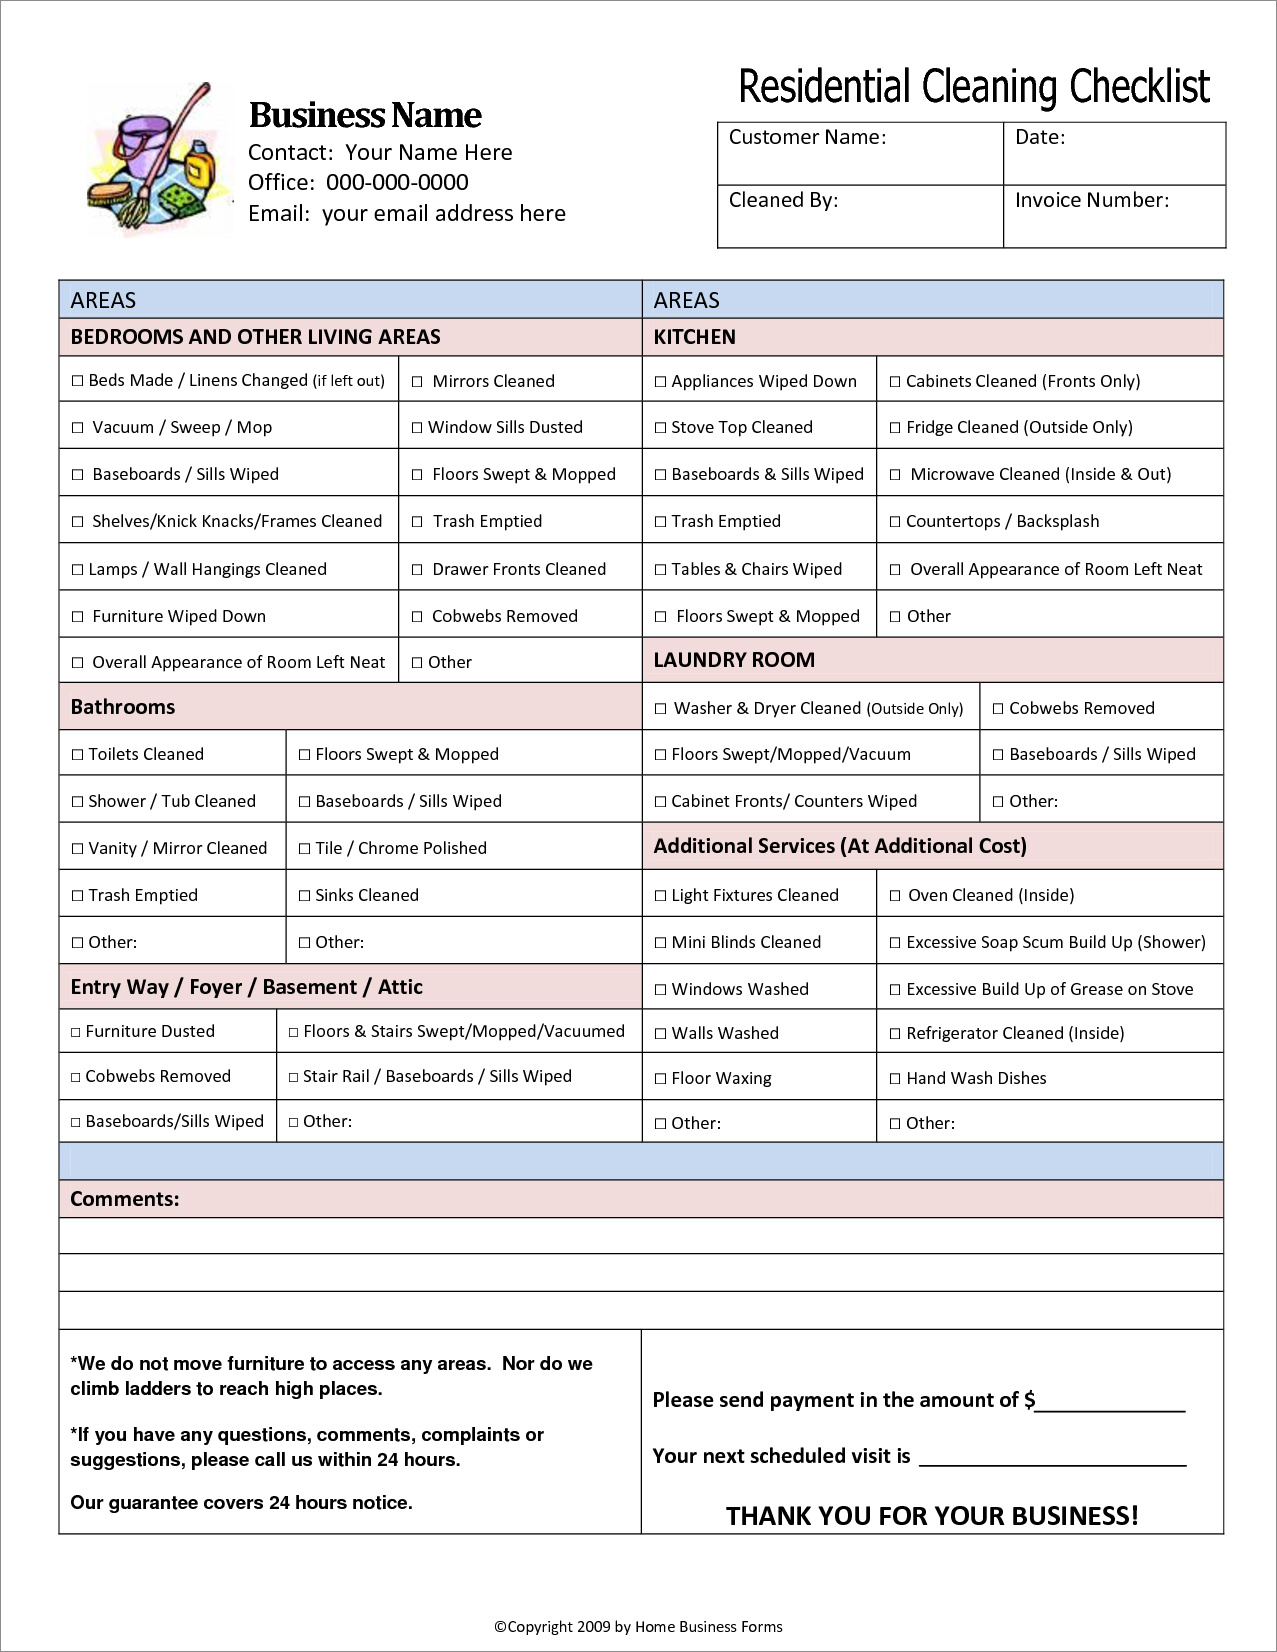 sample of residential cleaning checklist template